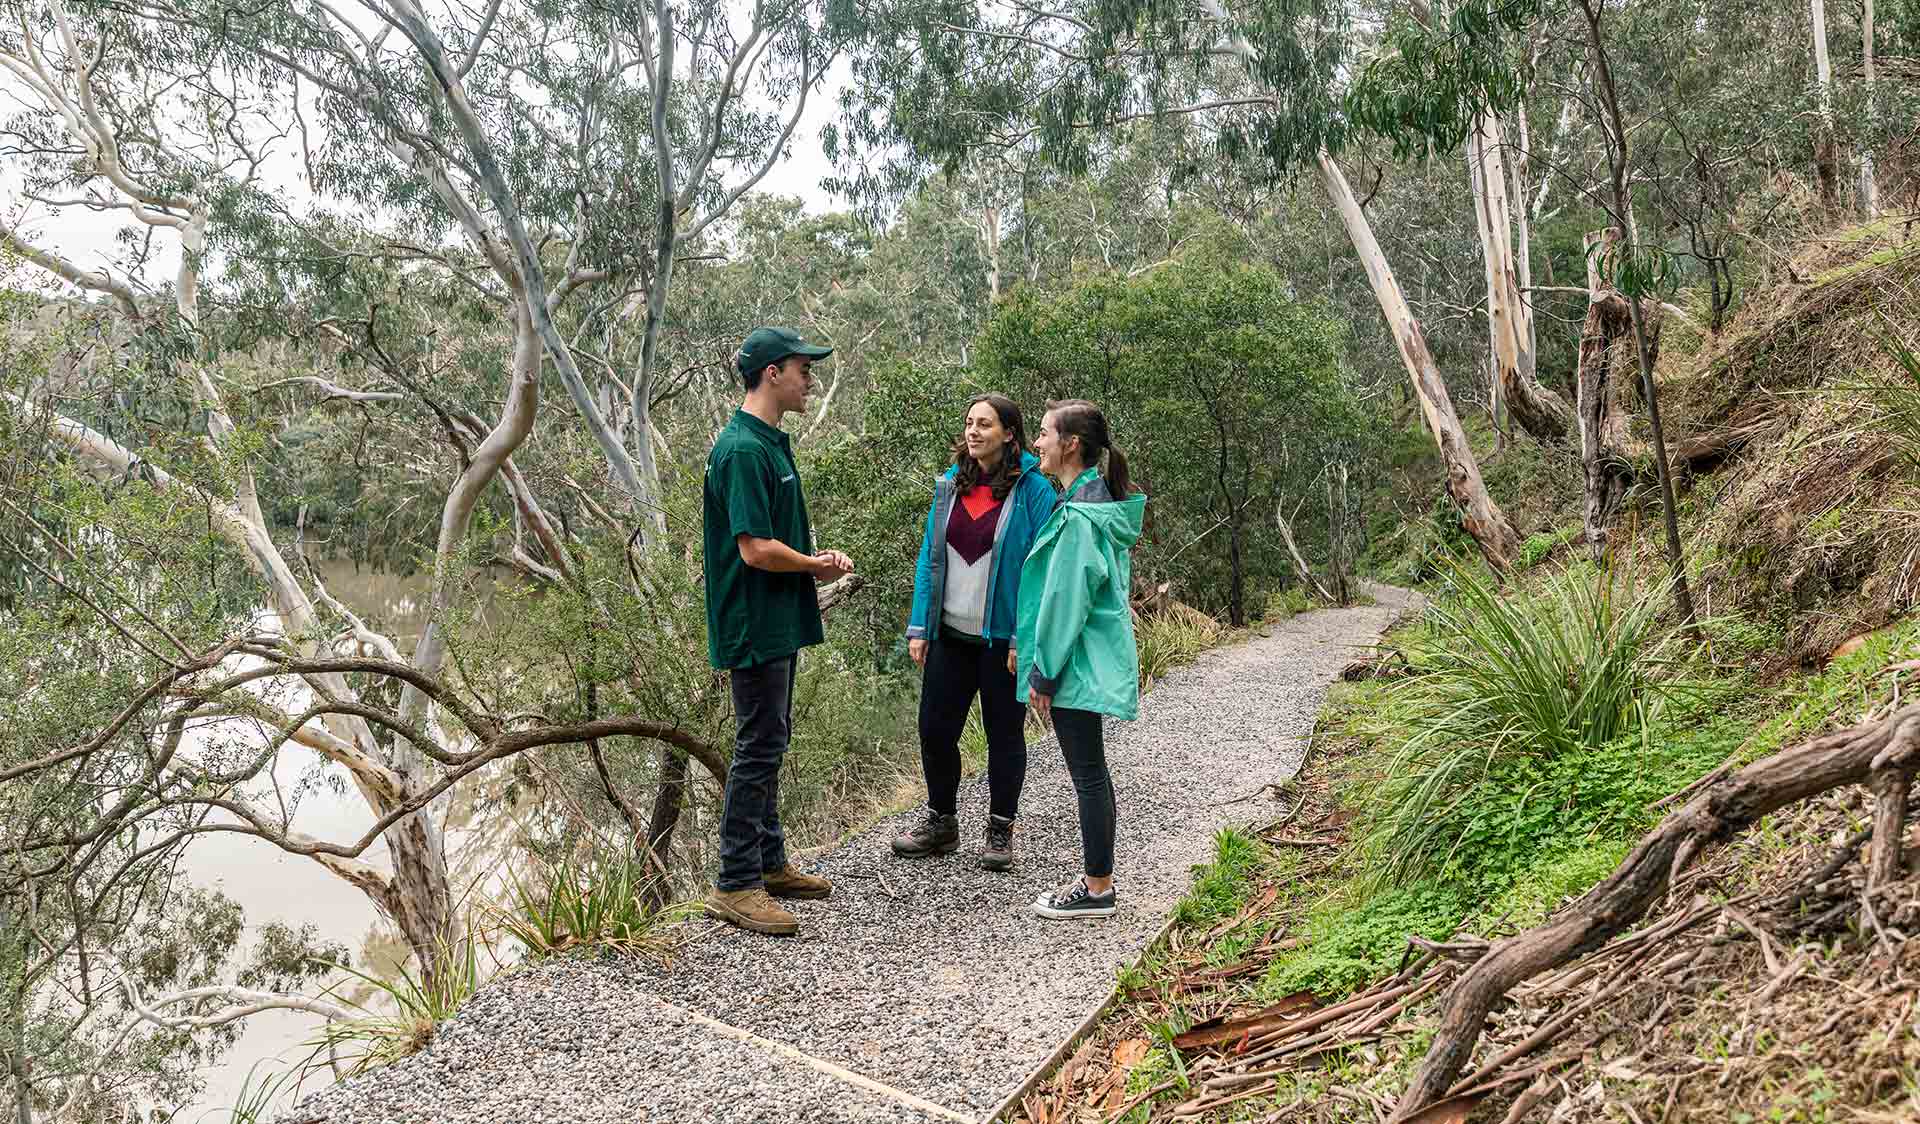 Two women take a volunteer led tour through the Flying Fox environments on the banks of the Yarra River in Yarra Bend Park